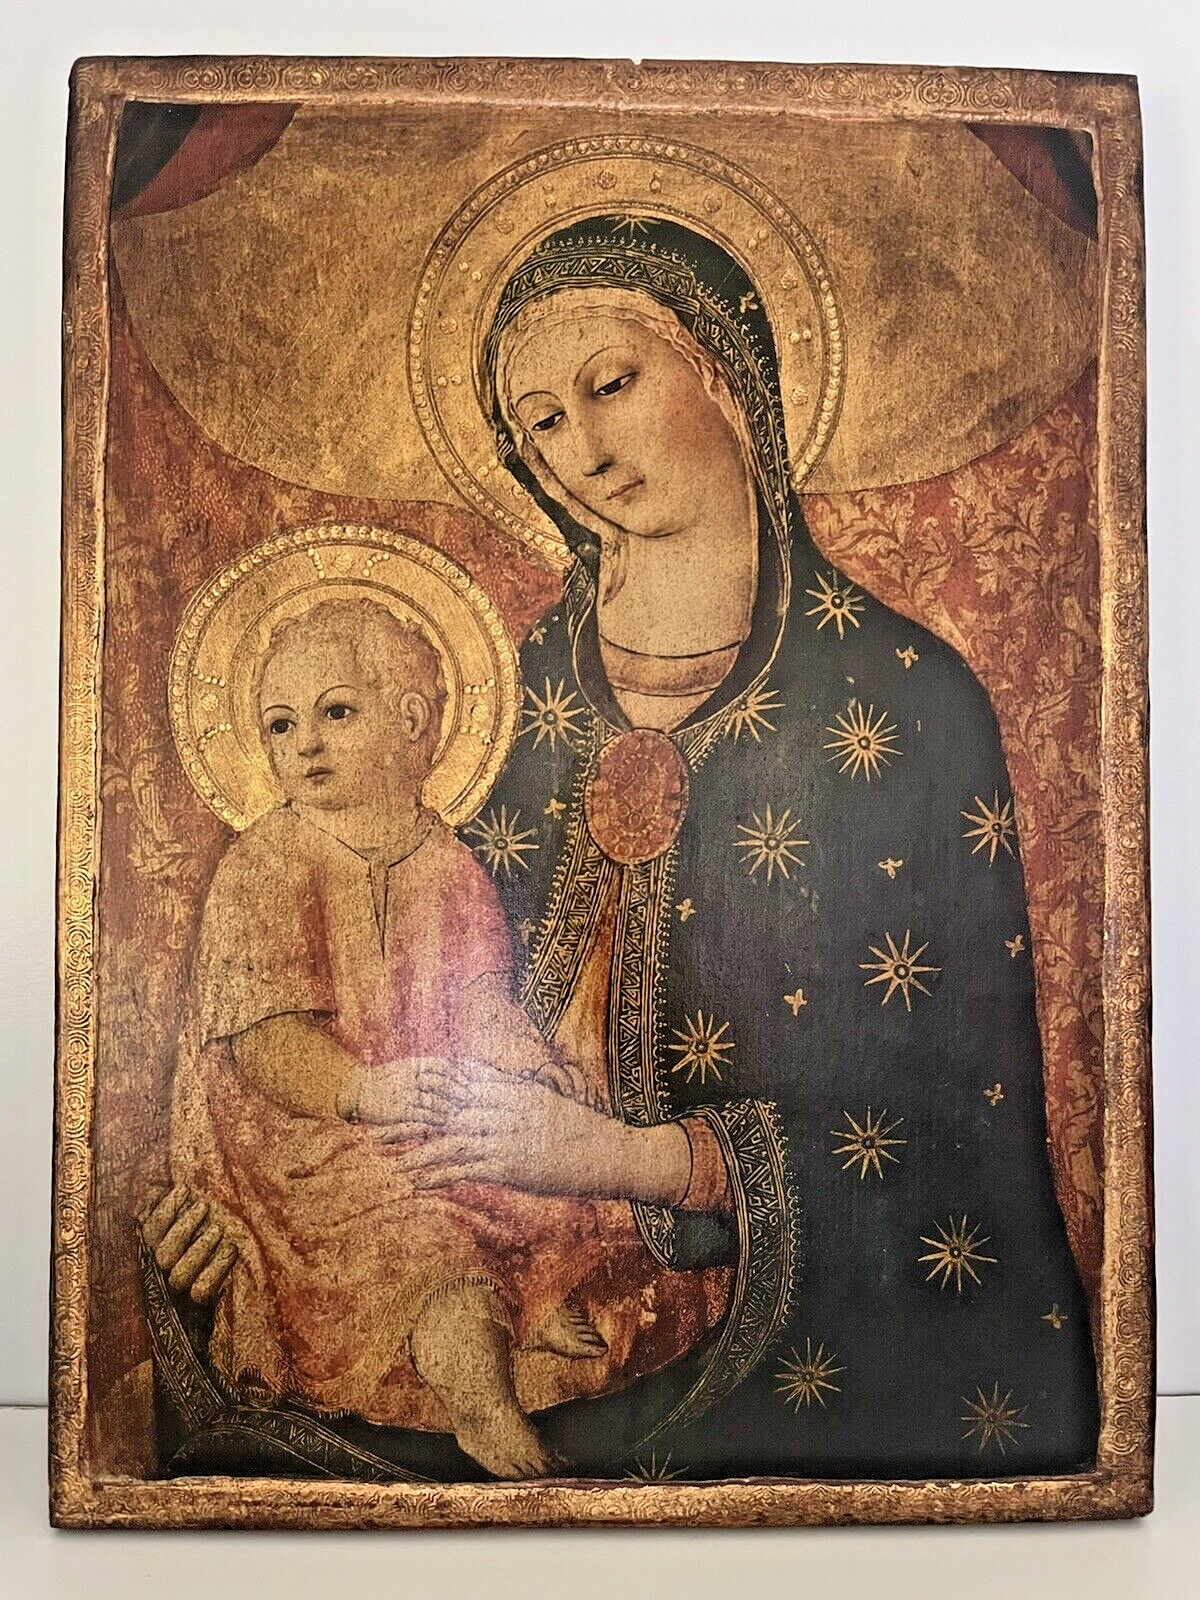 MADONNA AND CHILD BY SANO DI PIETRO 15th Century Sienese School Painting